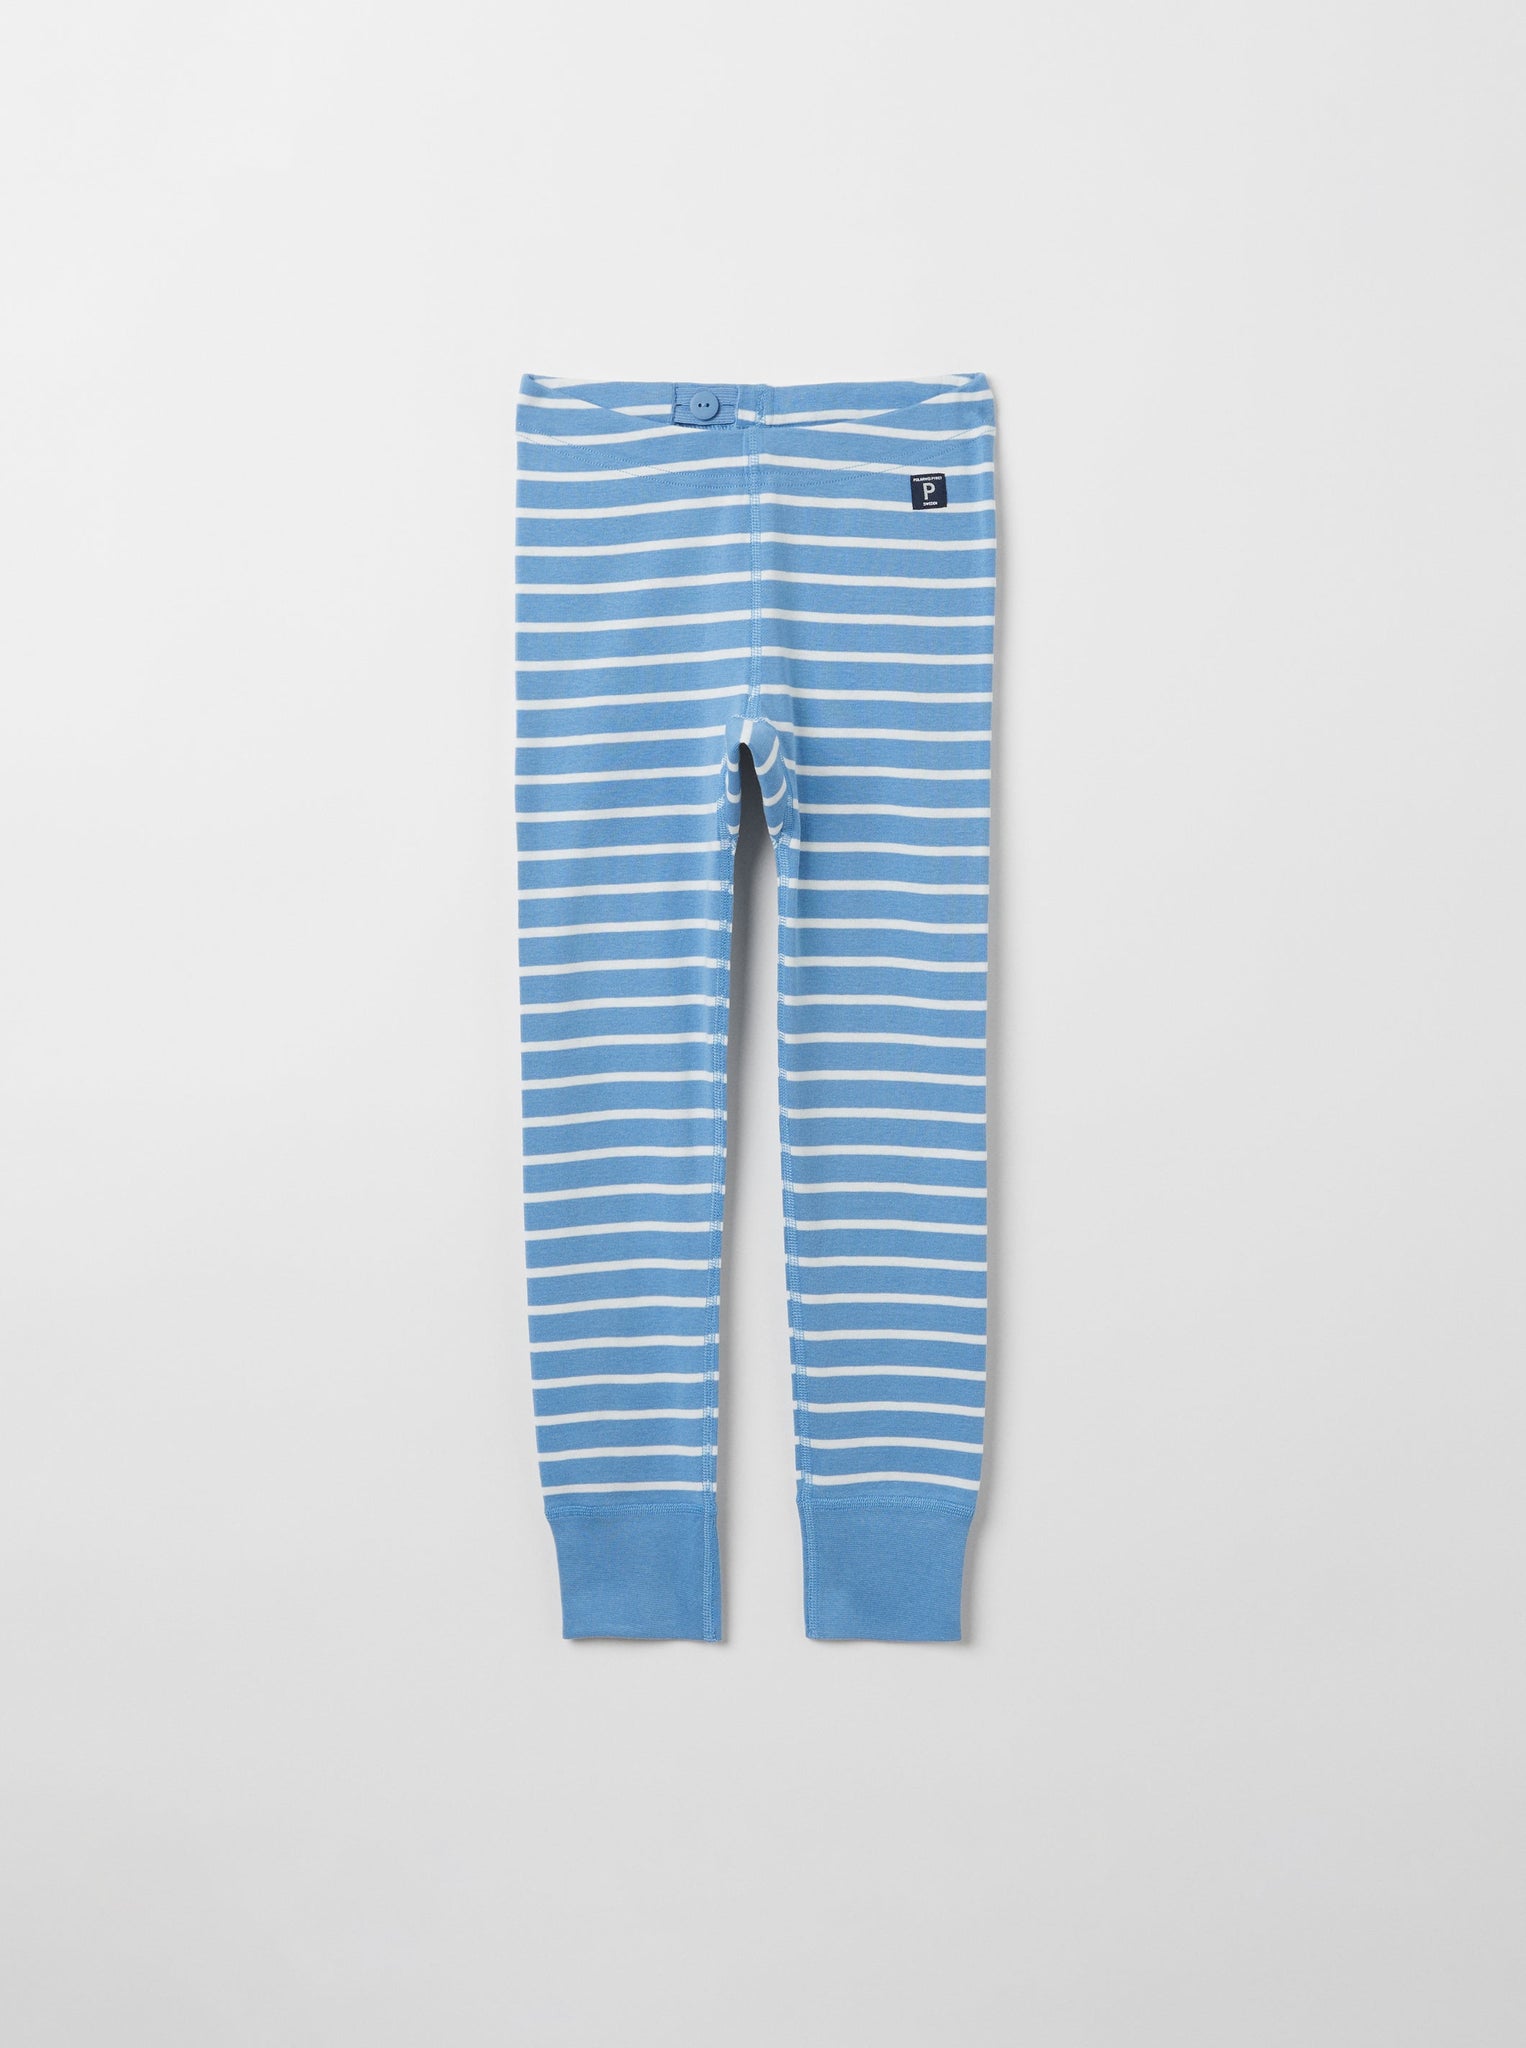 Organic Cotton Blue Kids Leggings from the Polarn O. Pyret kidswear collection. Ethically produced kids clothing.